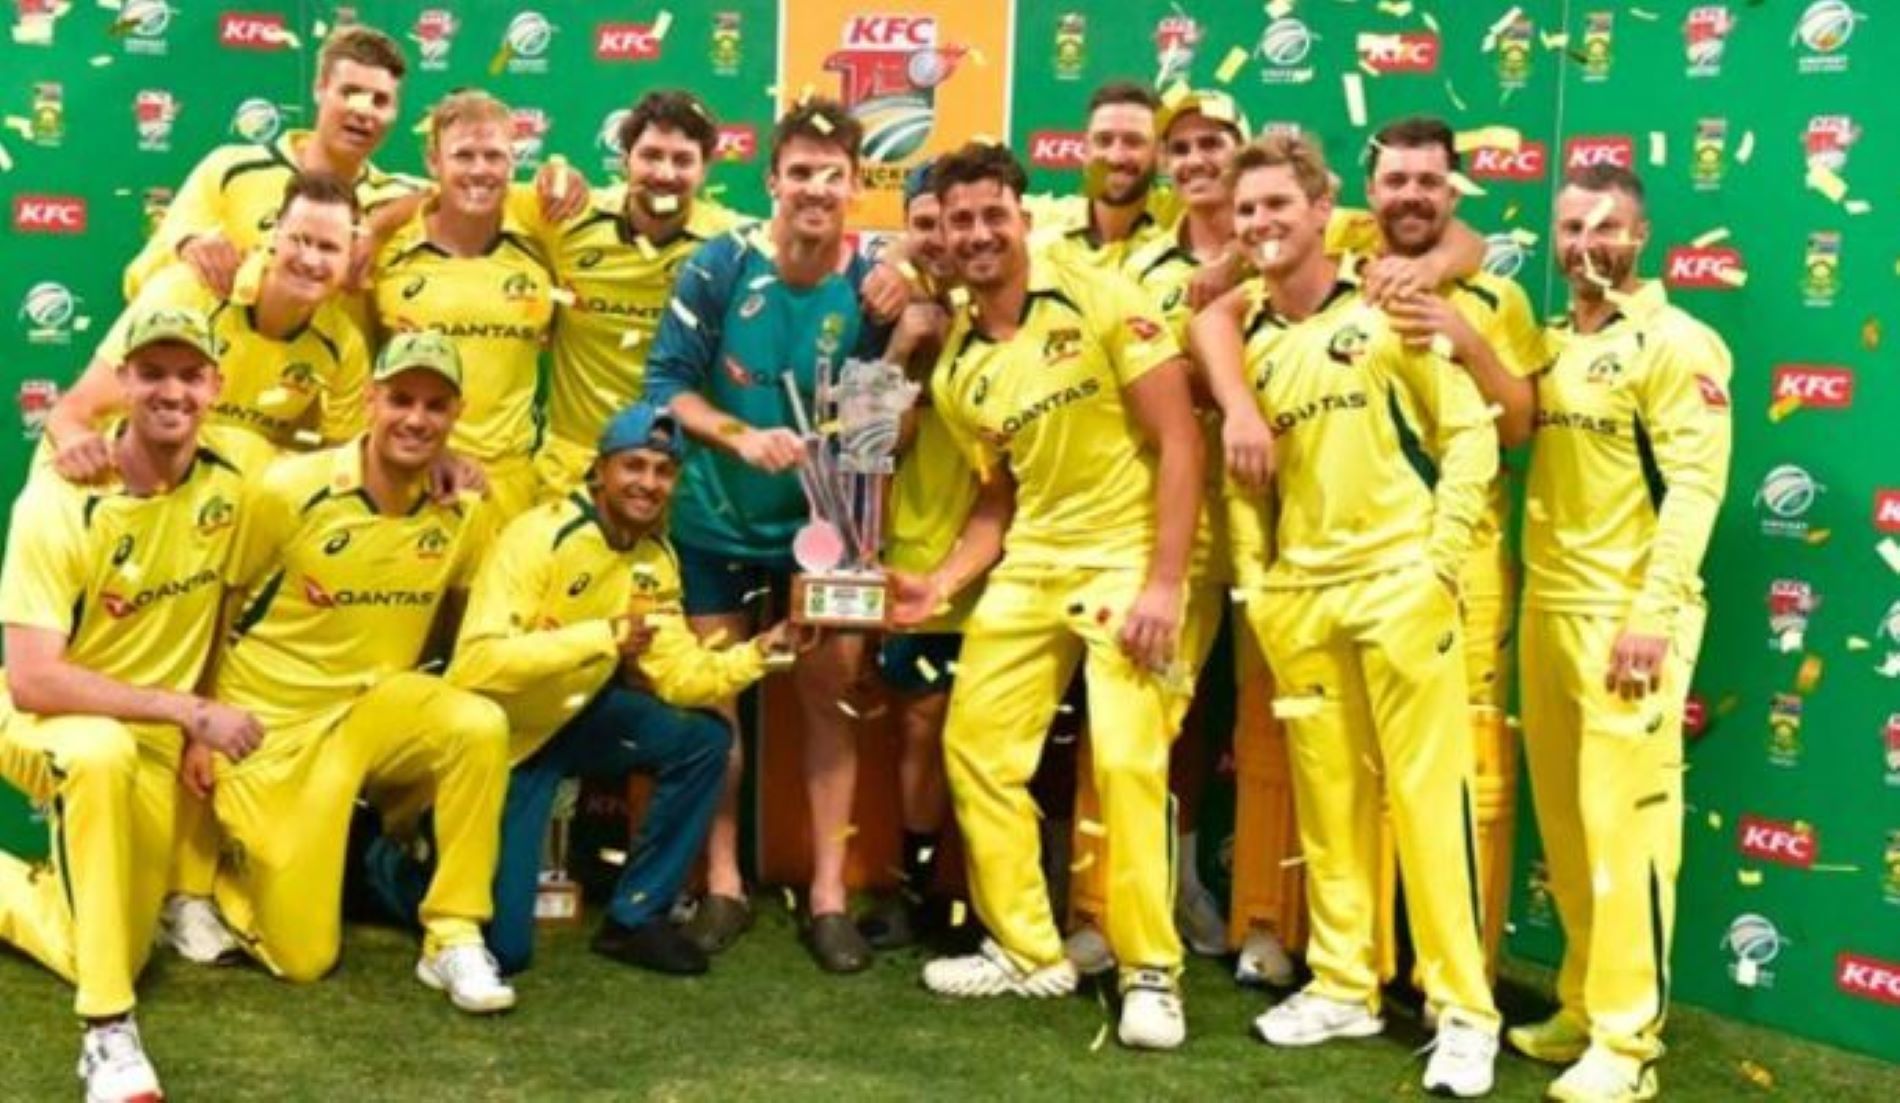 Australia have been utterly dominant in ODIs this year